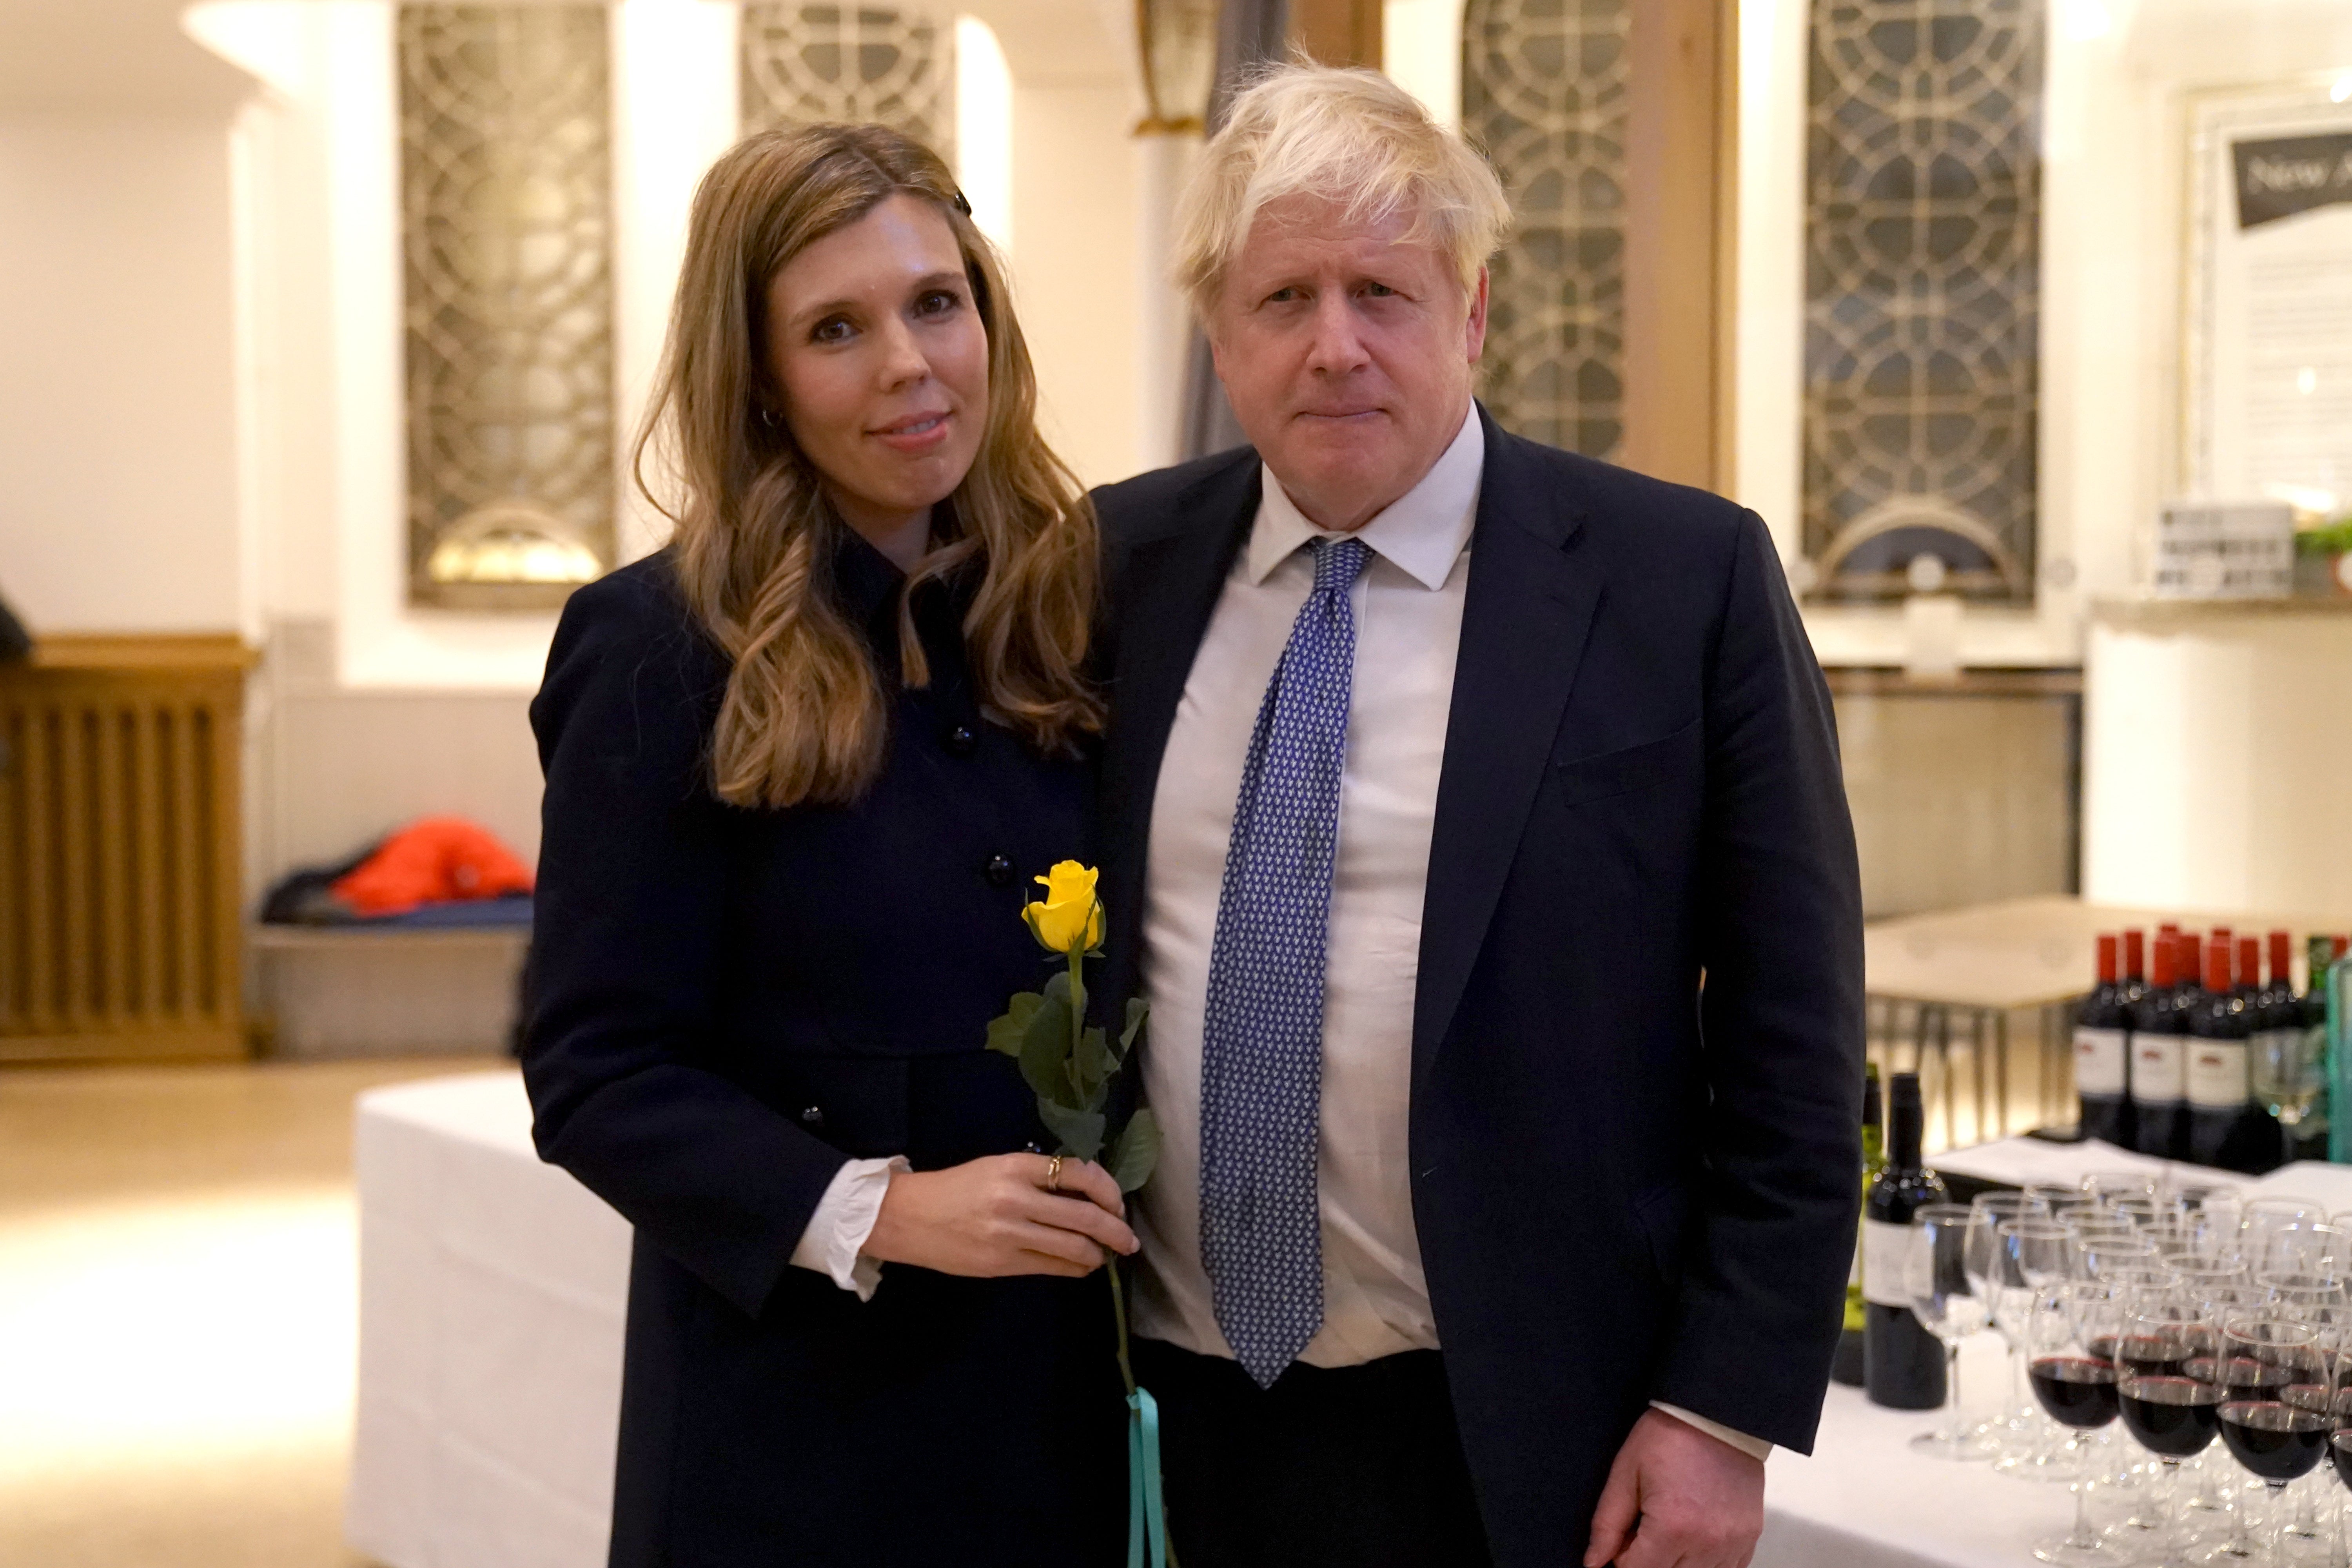 Boris and Carrie Johnson have dismissed any suggestions they broke Covid rules as ‘totally false’